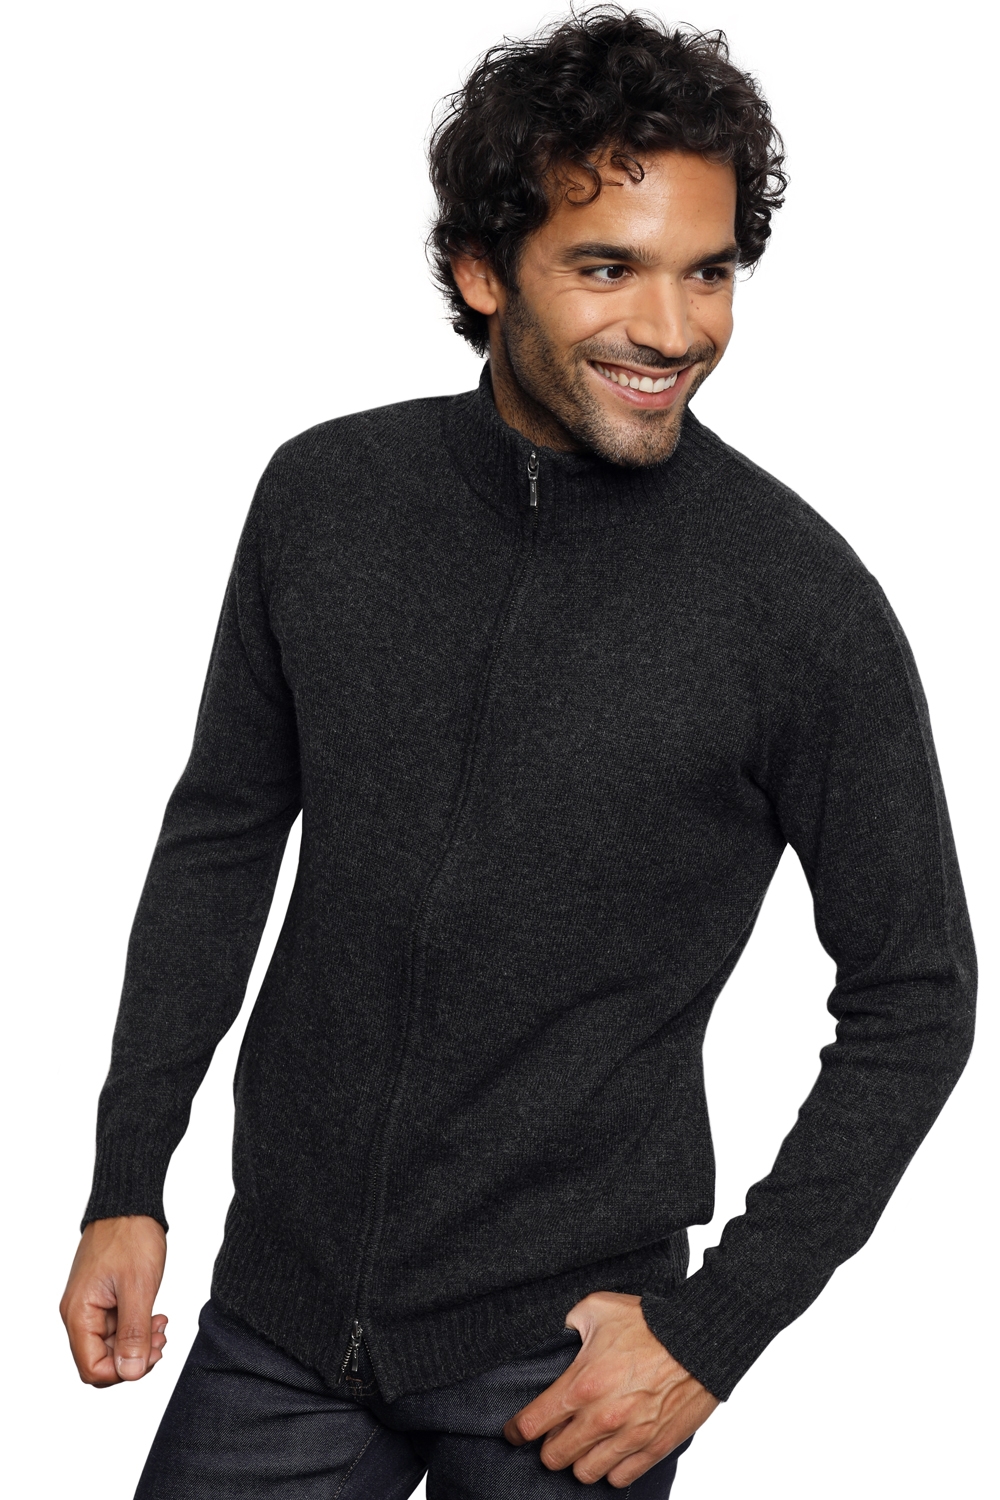 Chameau pull homme zip capuche clyde anthracite l